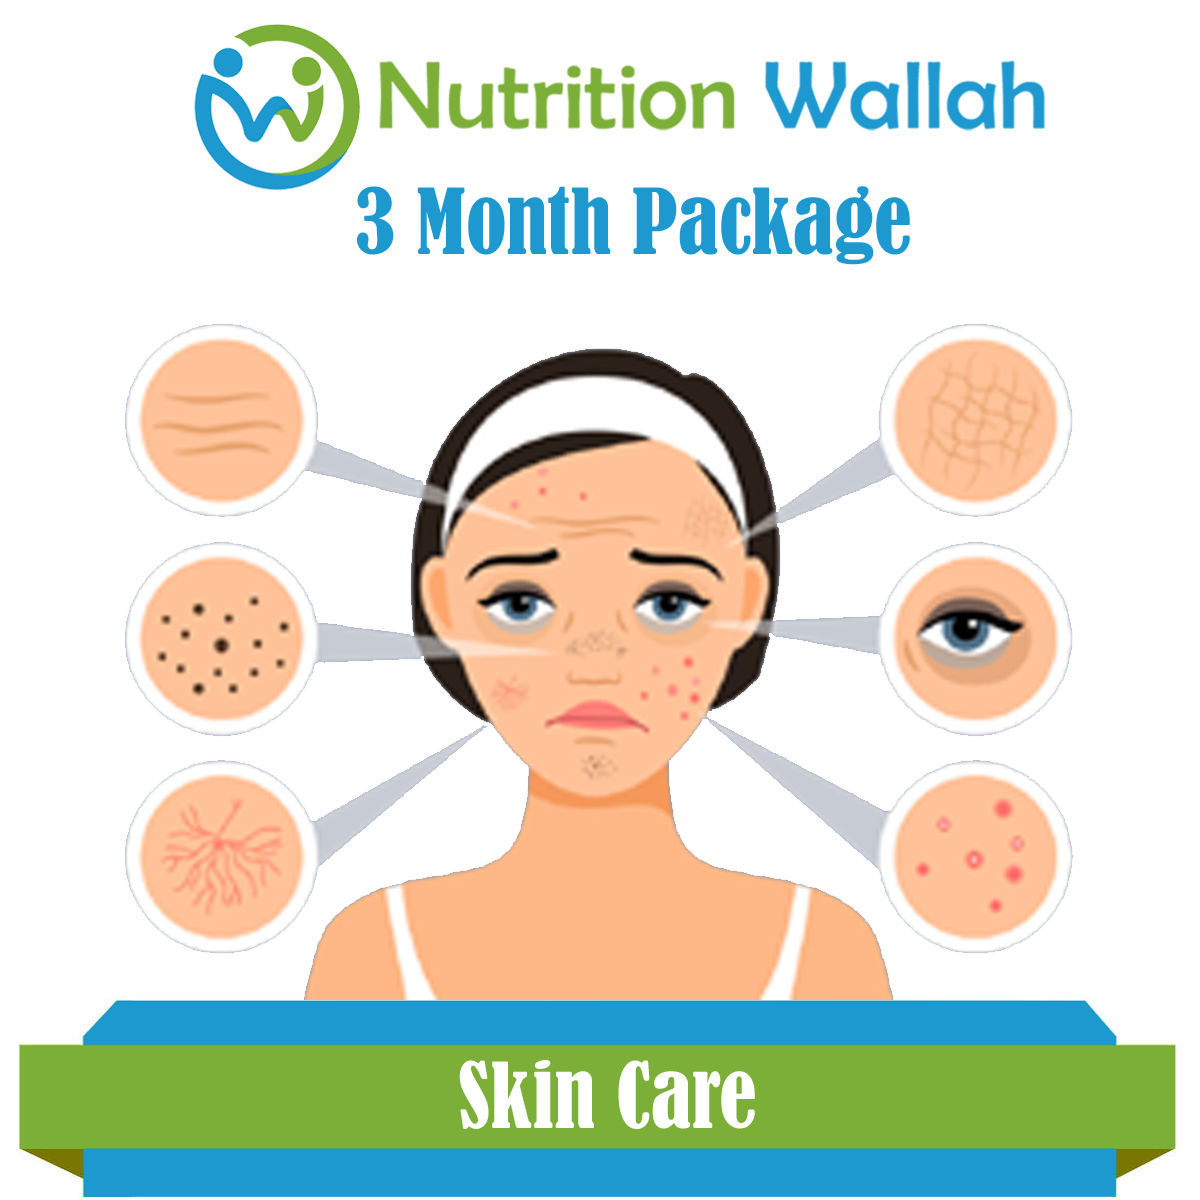 3 Month Package Skin Care